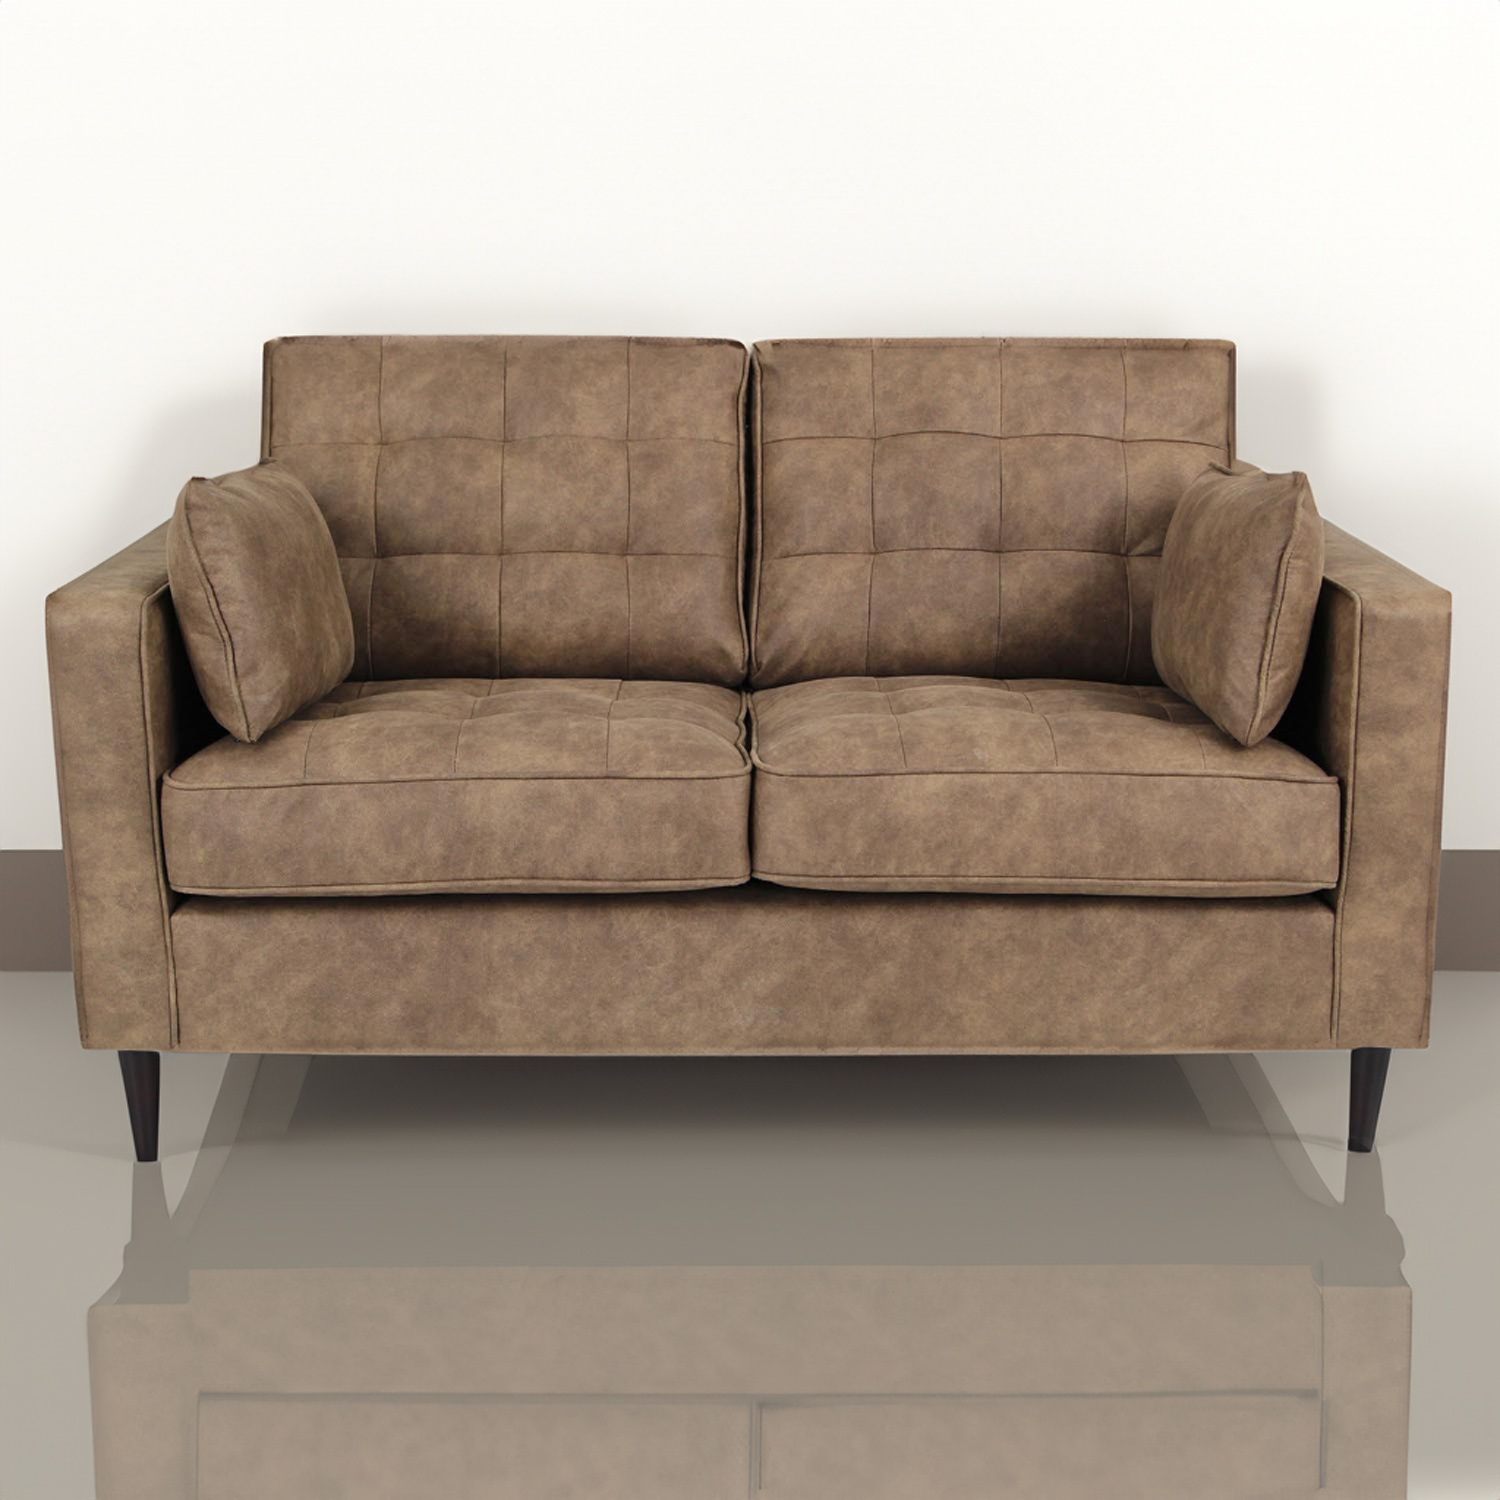 Anabelle 2 Seater Brown Fabric Sofa Image 1